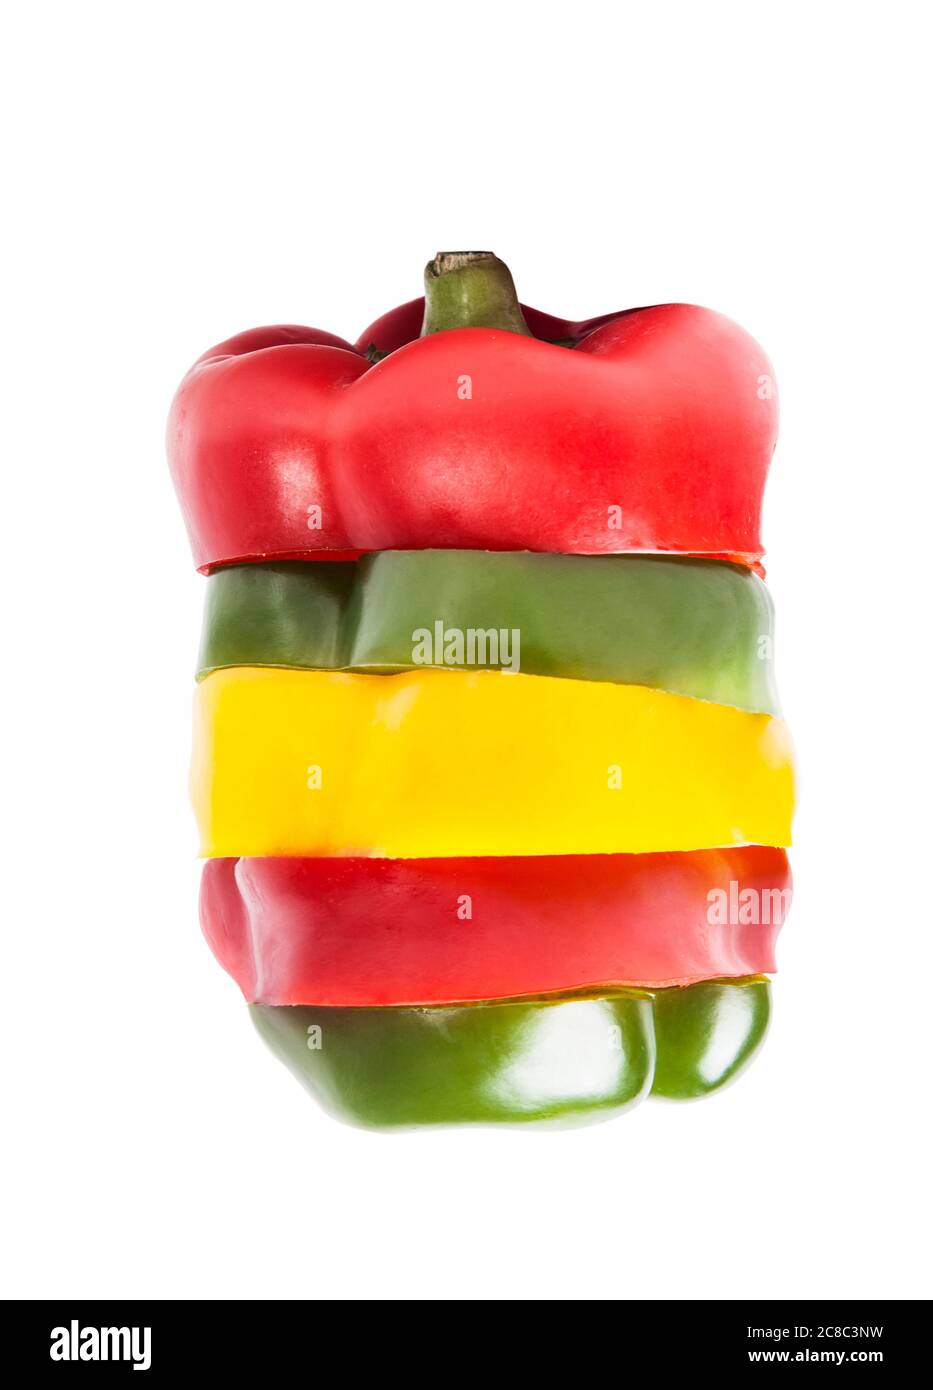 Slices of yellow green and red peppers making up one large pepper Stock Photo